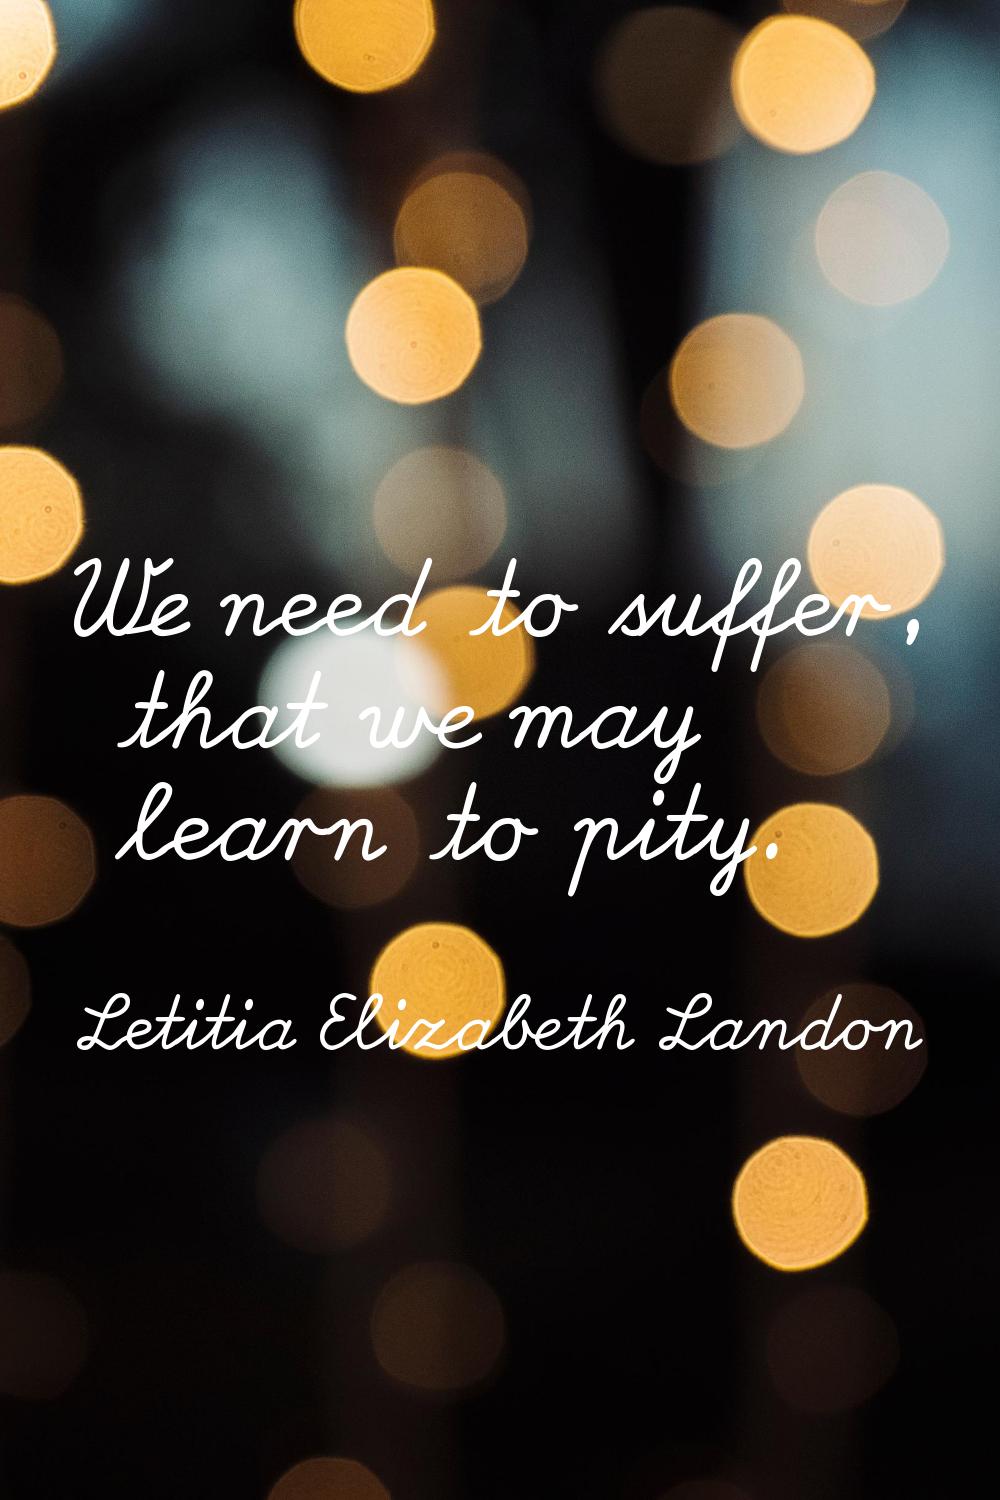 We need to suffer, that we may learn to pity.